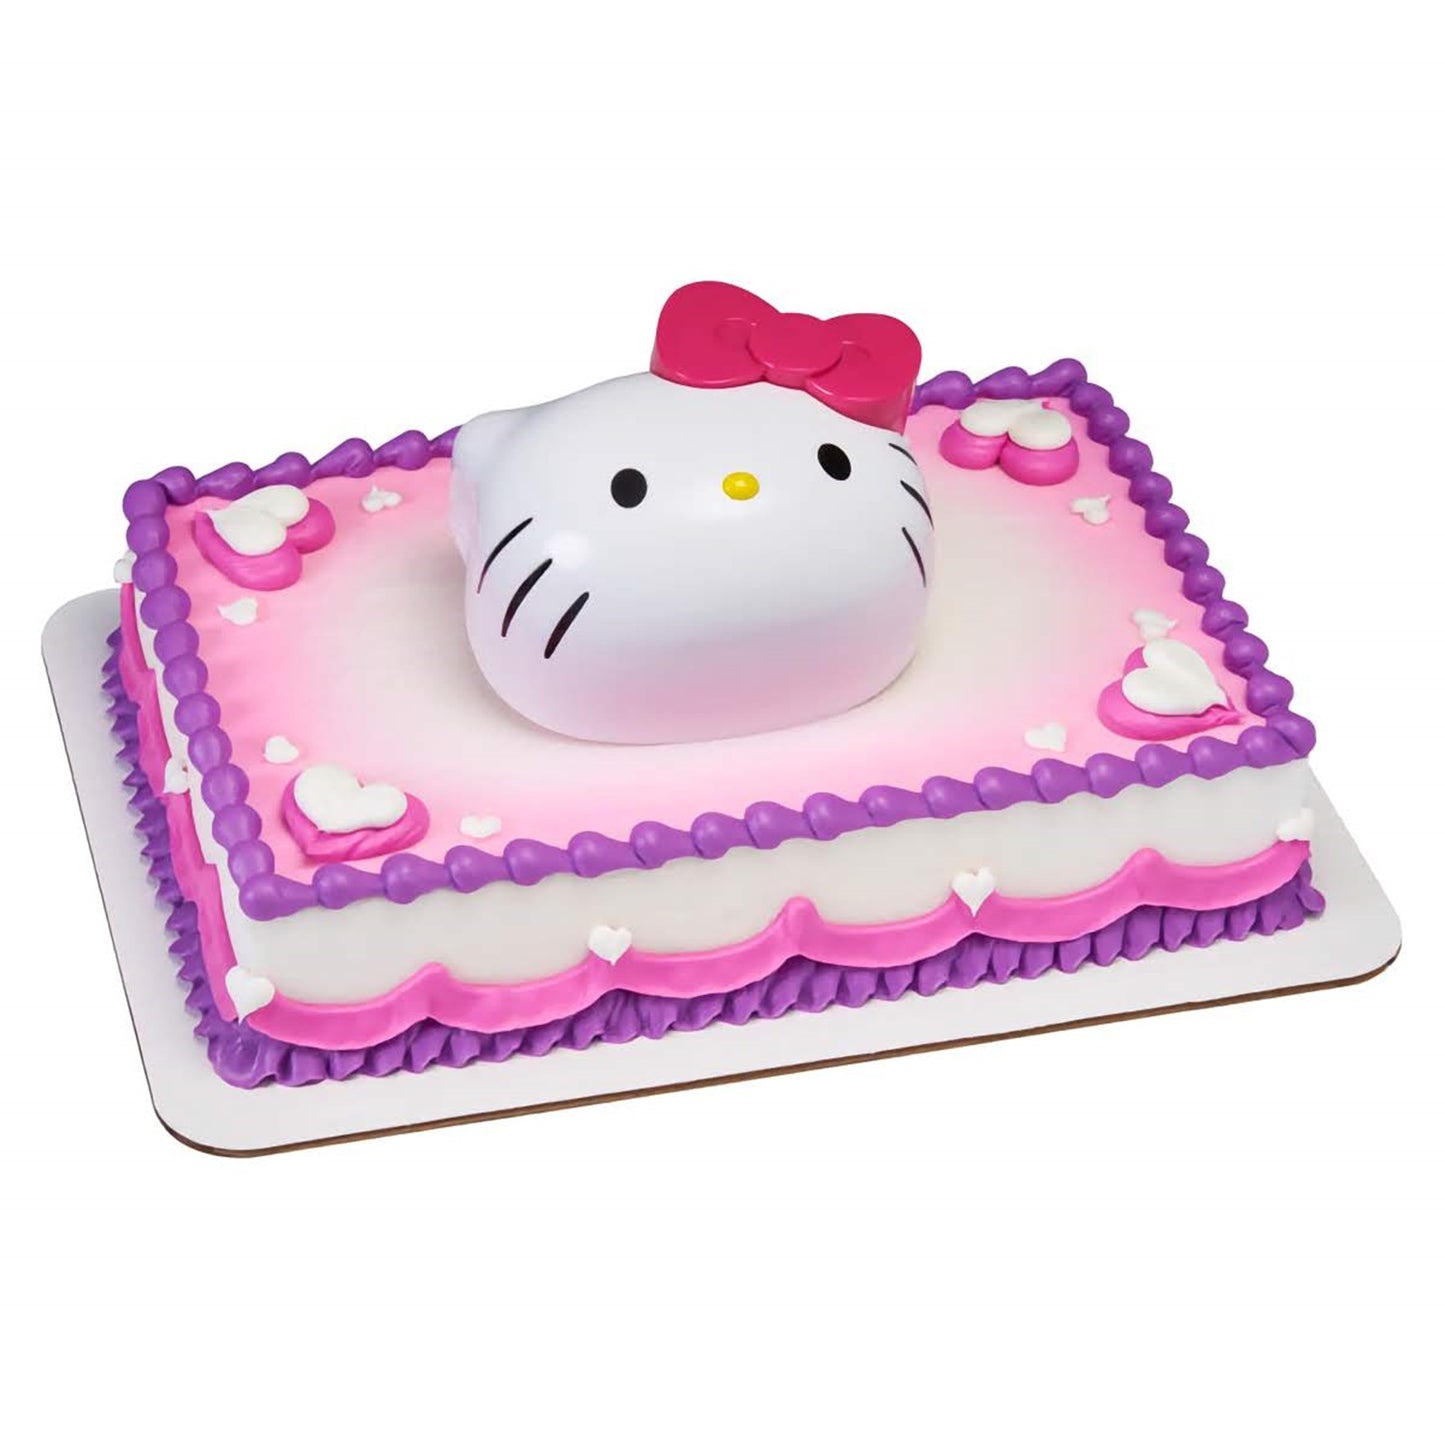 A square cake topped with a large Hello Kitty figure and surrounded by delicate icing hearts and bows, including a surprise toy set, creating a delightful centerpiece for Hello kitty fans.